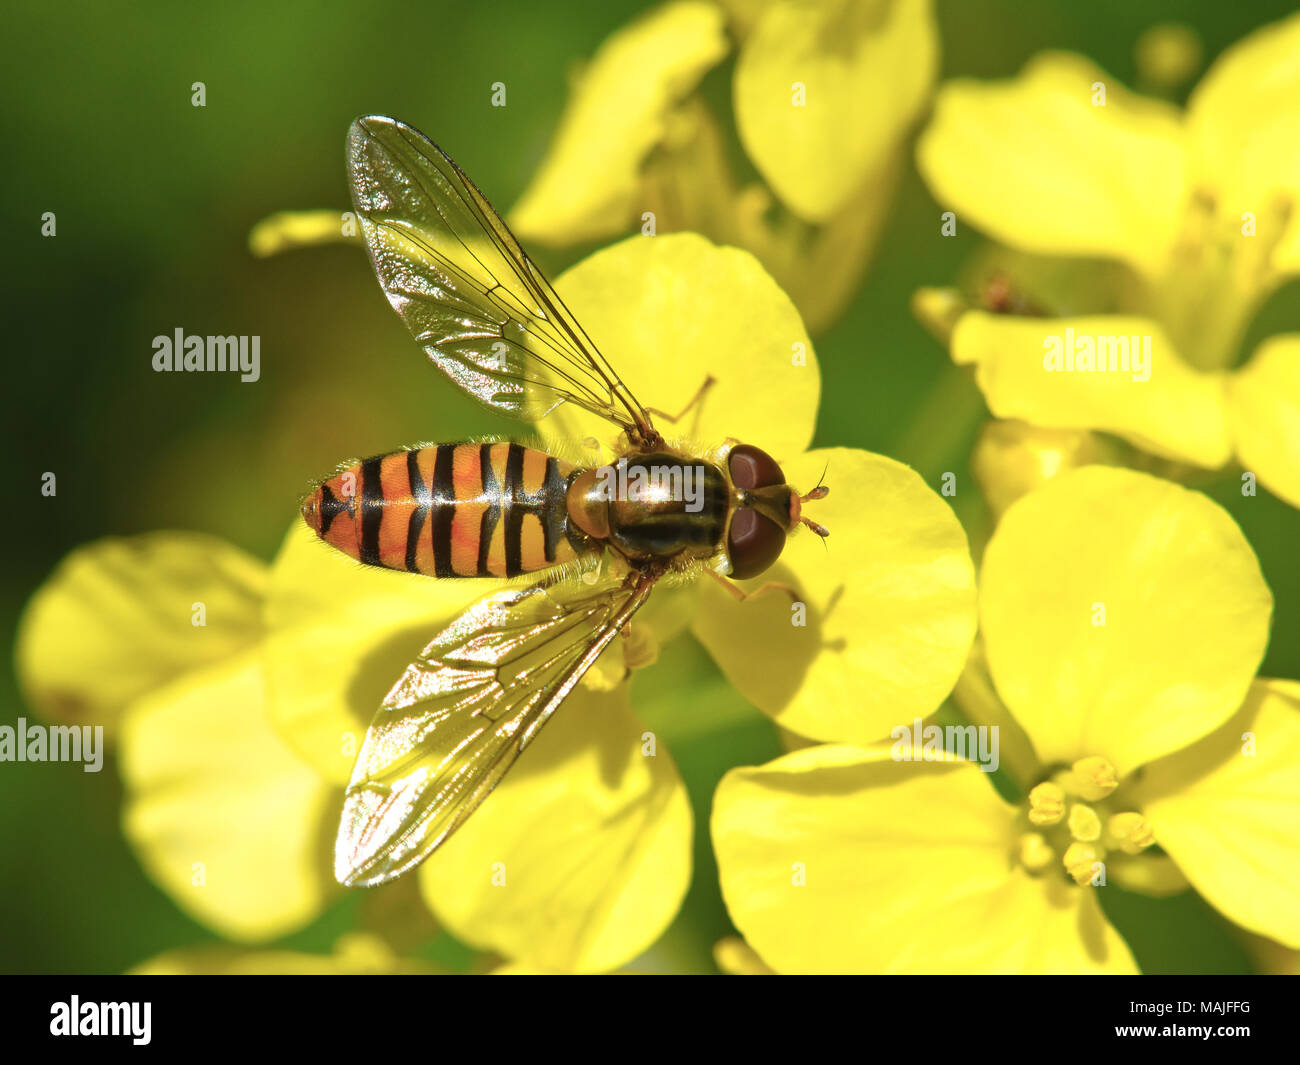 Hover fly on yellow flower Stock Photo